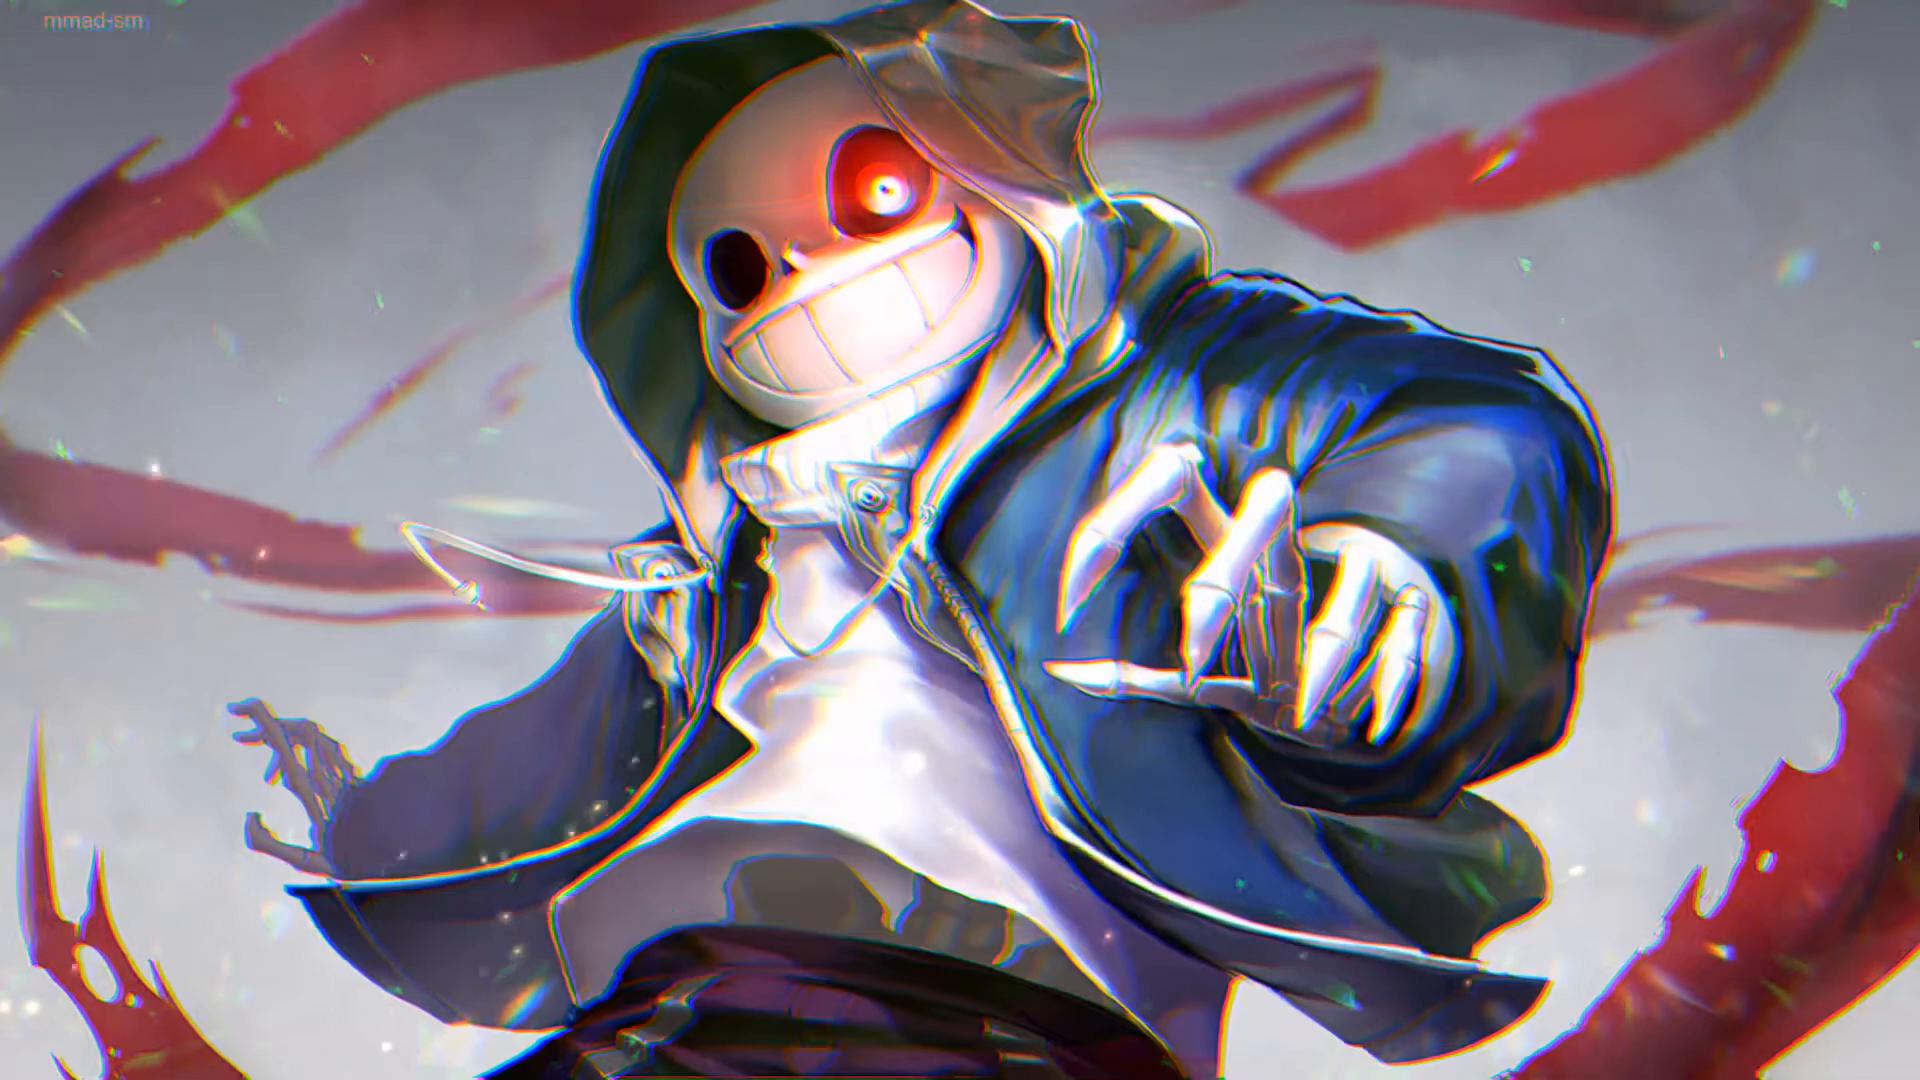 Sans fight HD wallpapers